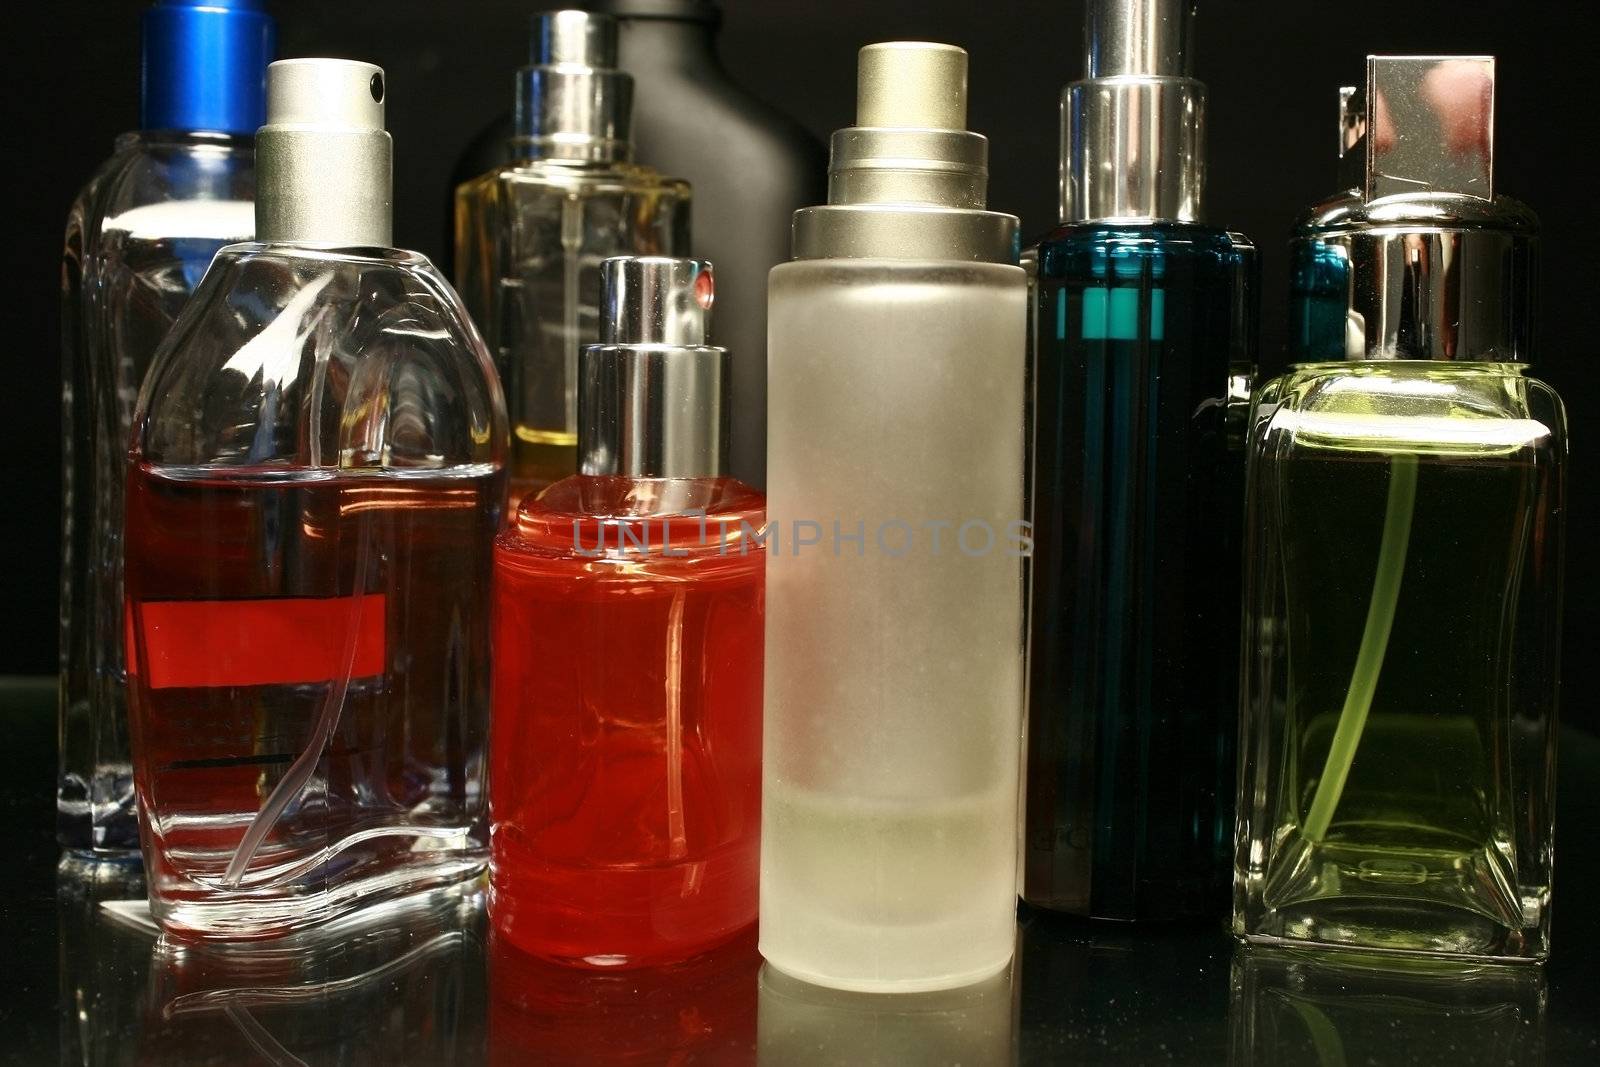 fragrances and perfume bottles on a black background